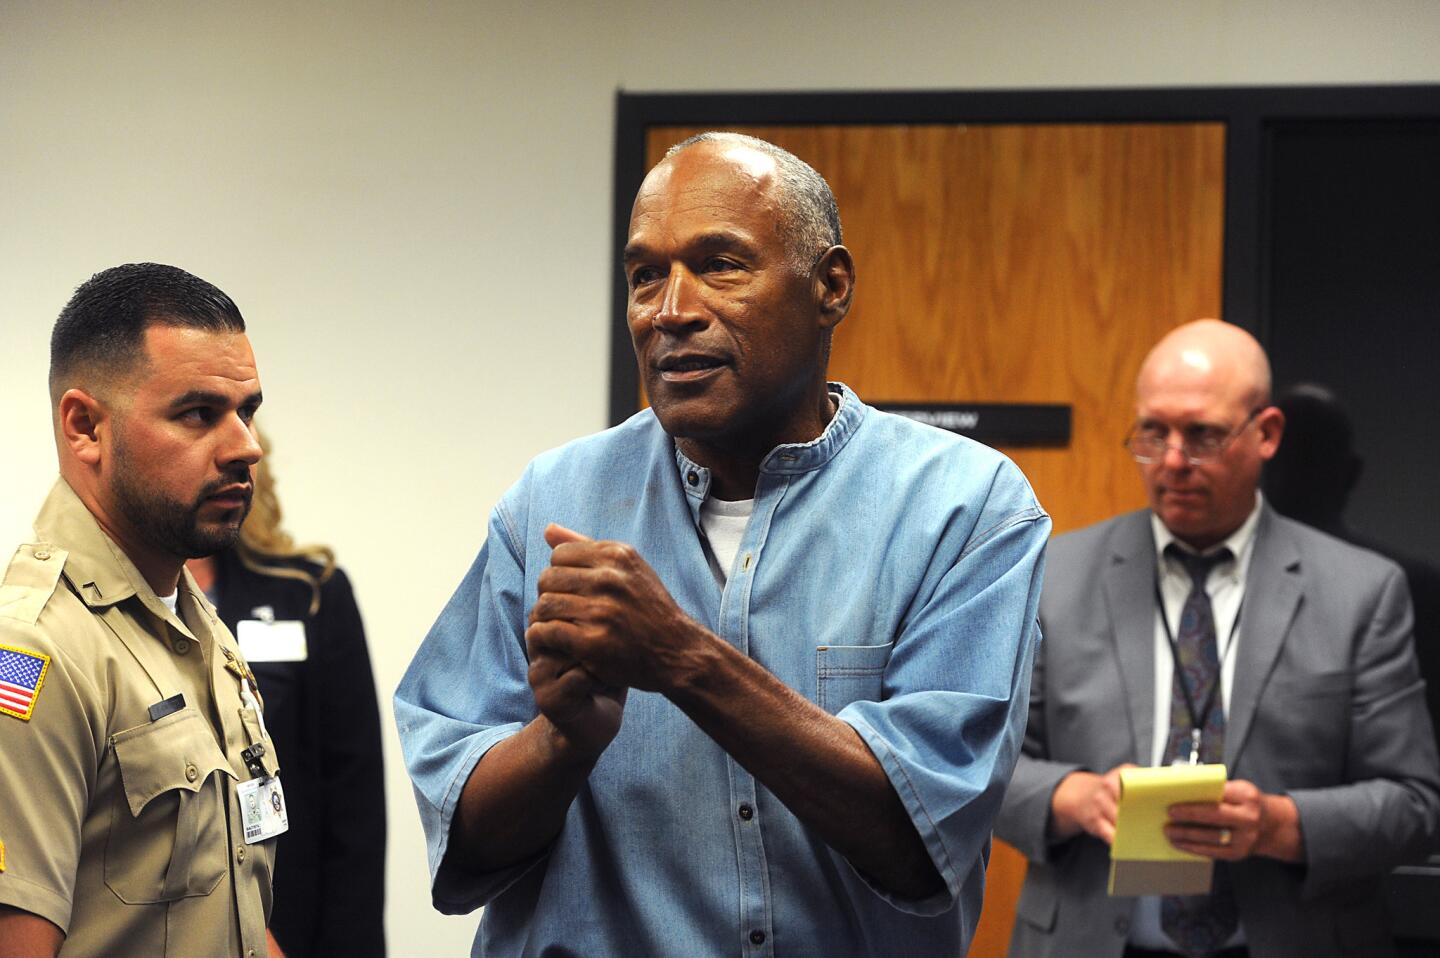 O.J. Simpson reacts after learning he was granted parole at Lovelock Correctional Center in Lovelock, Nevada.